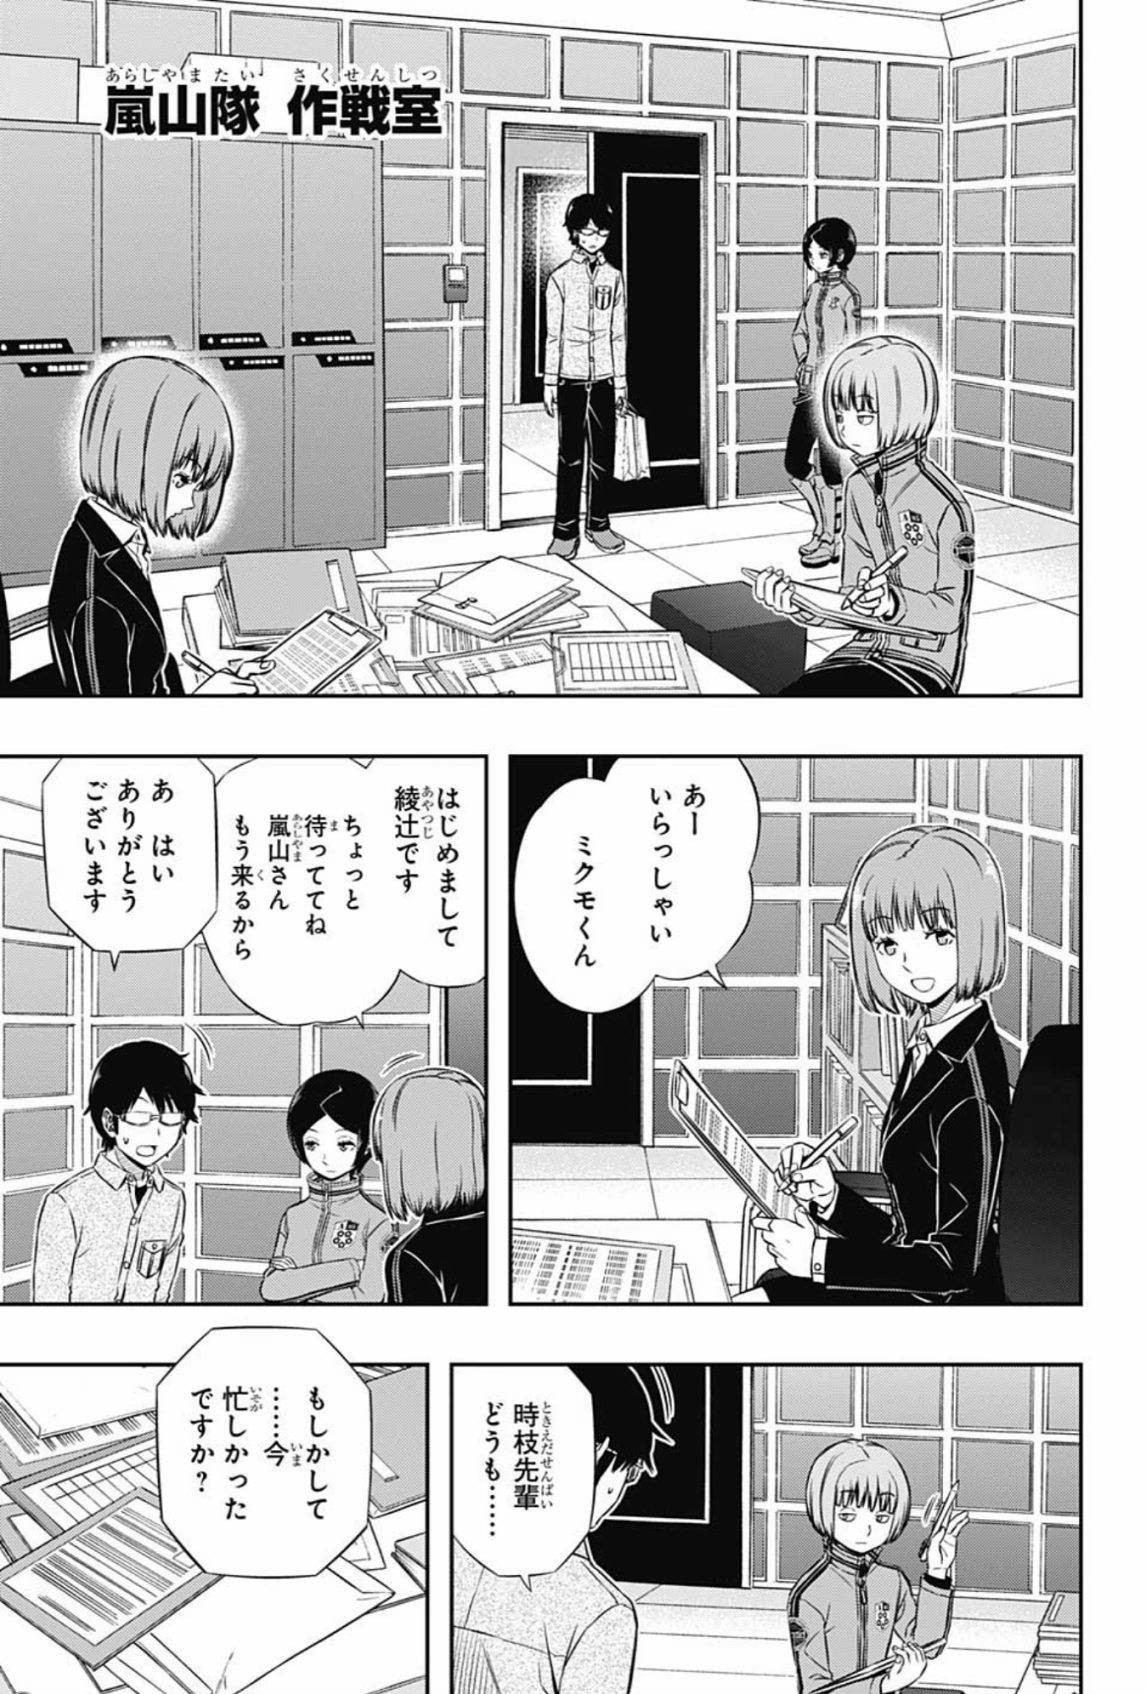 World Trigger - Chapter 107 - Page 3